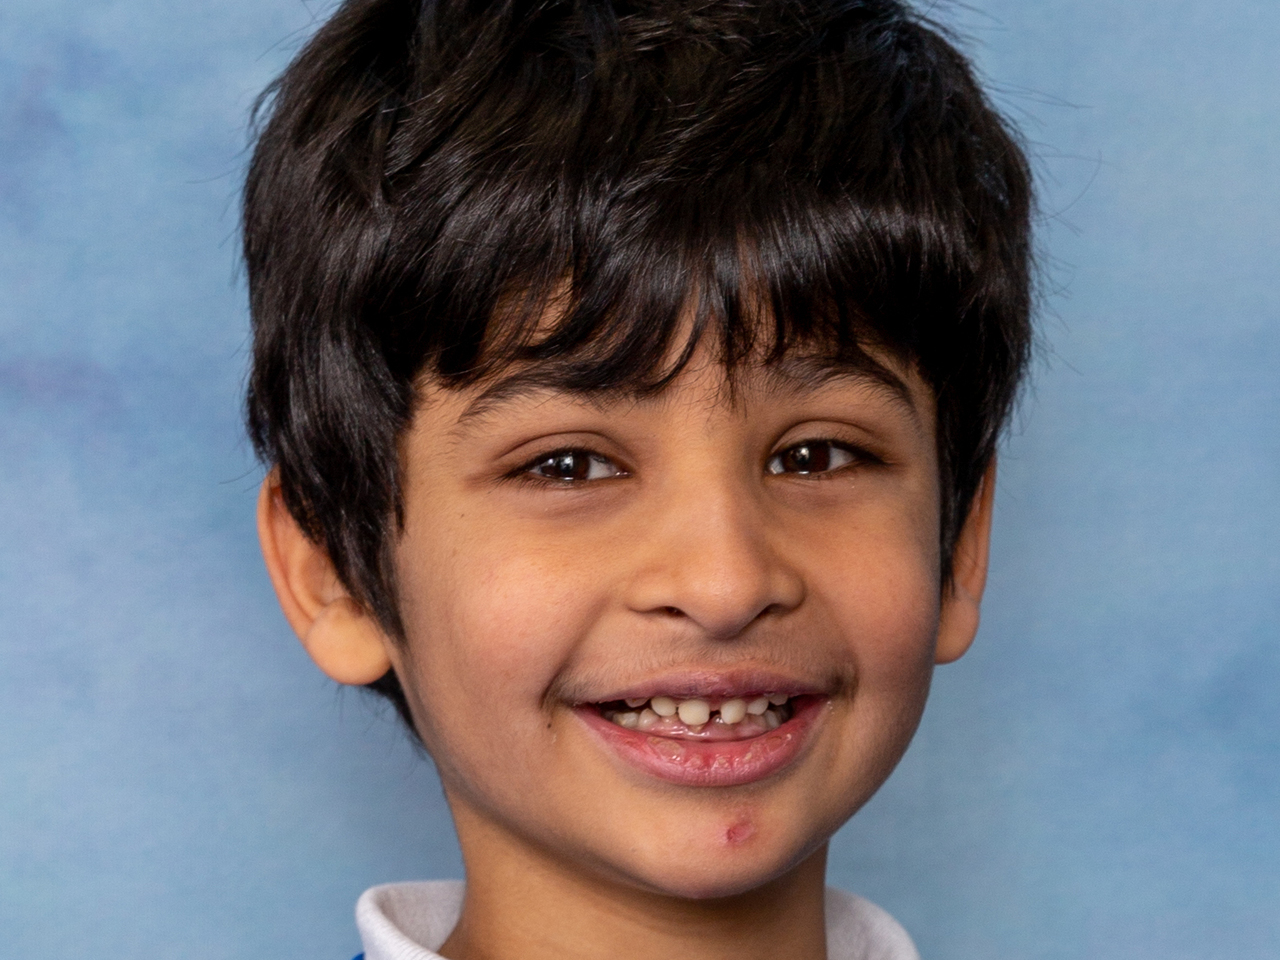 School portrait session for this handsome young man in Manchester